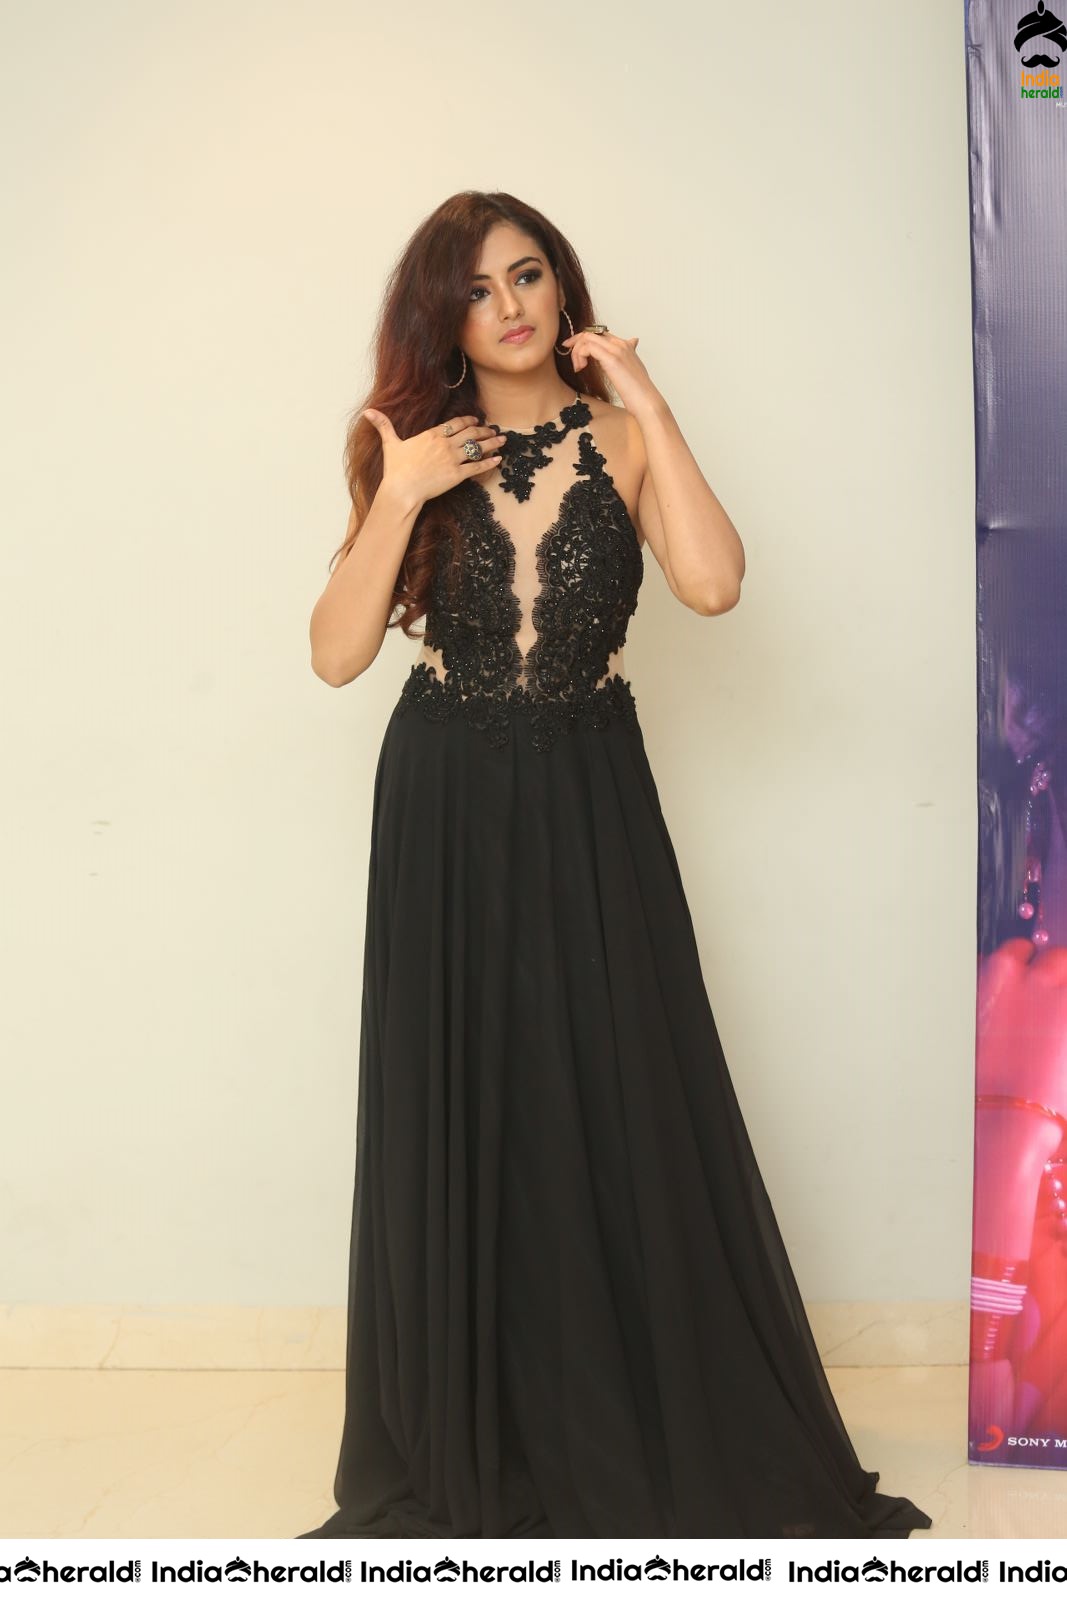 Actress Malvikaa Looking Pretty and Cute in Black